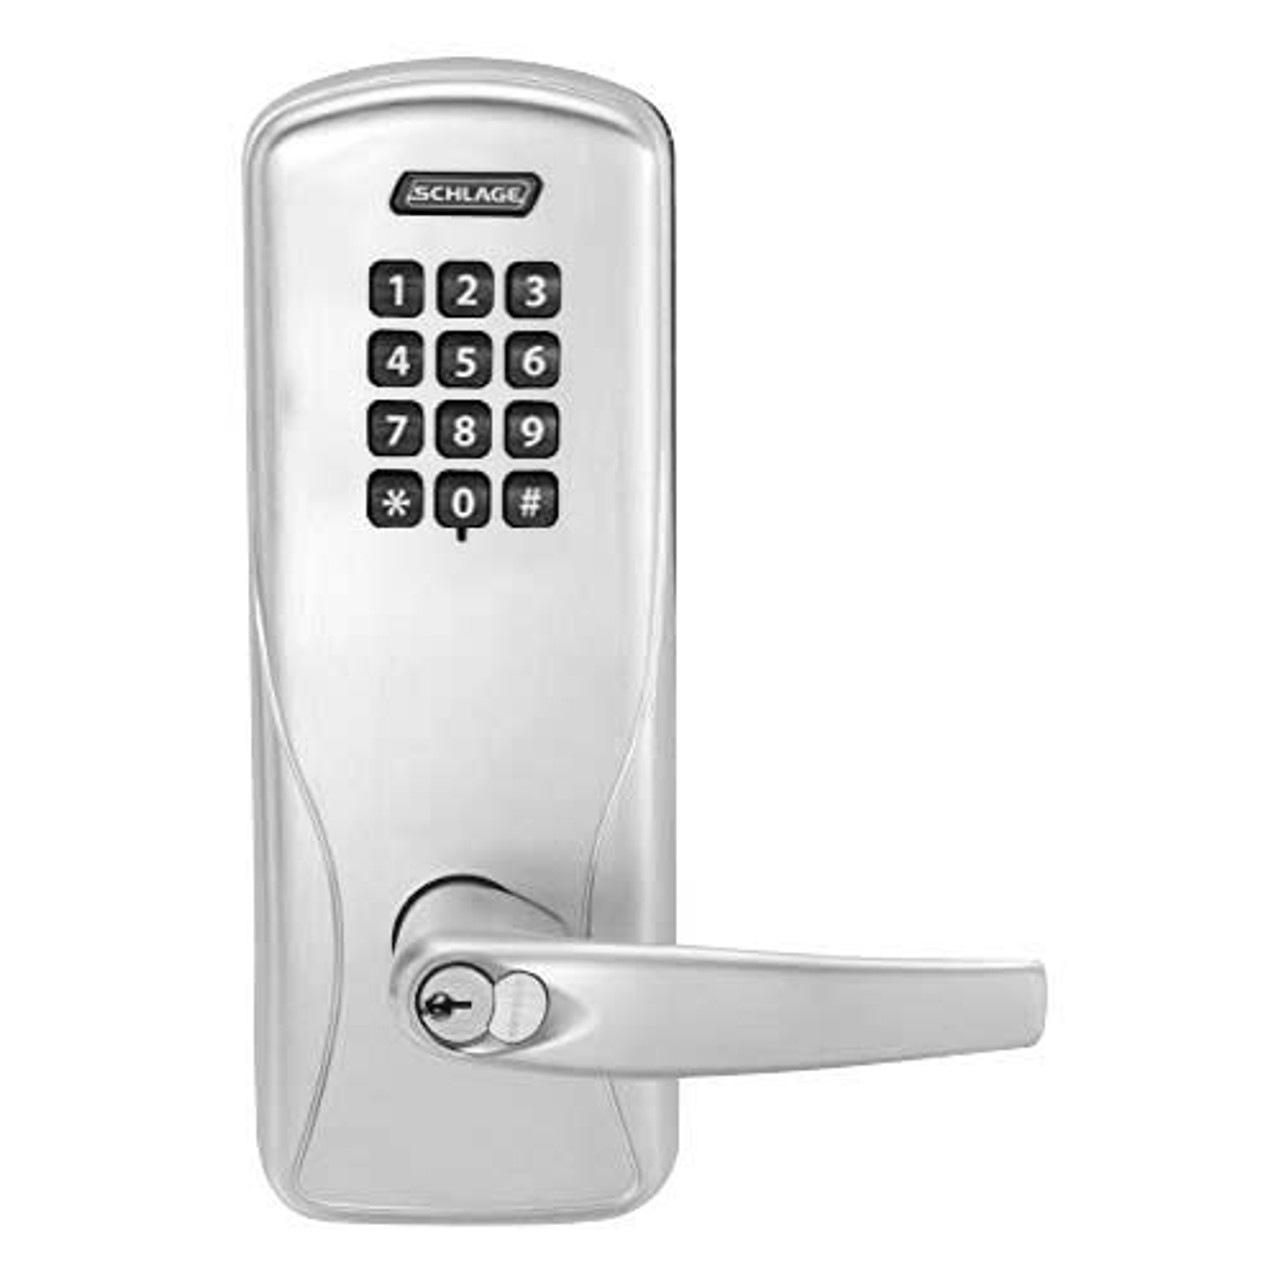 CO100-MS-50-KP-ATH-GD-29R-626 Schlage Standalone Mortise Electronic Keypad locks in Satin Chrome